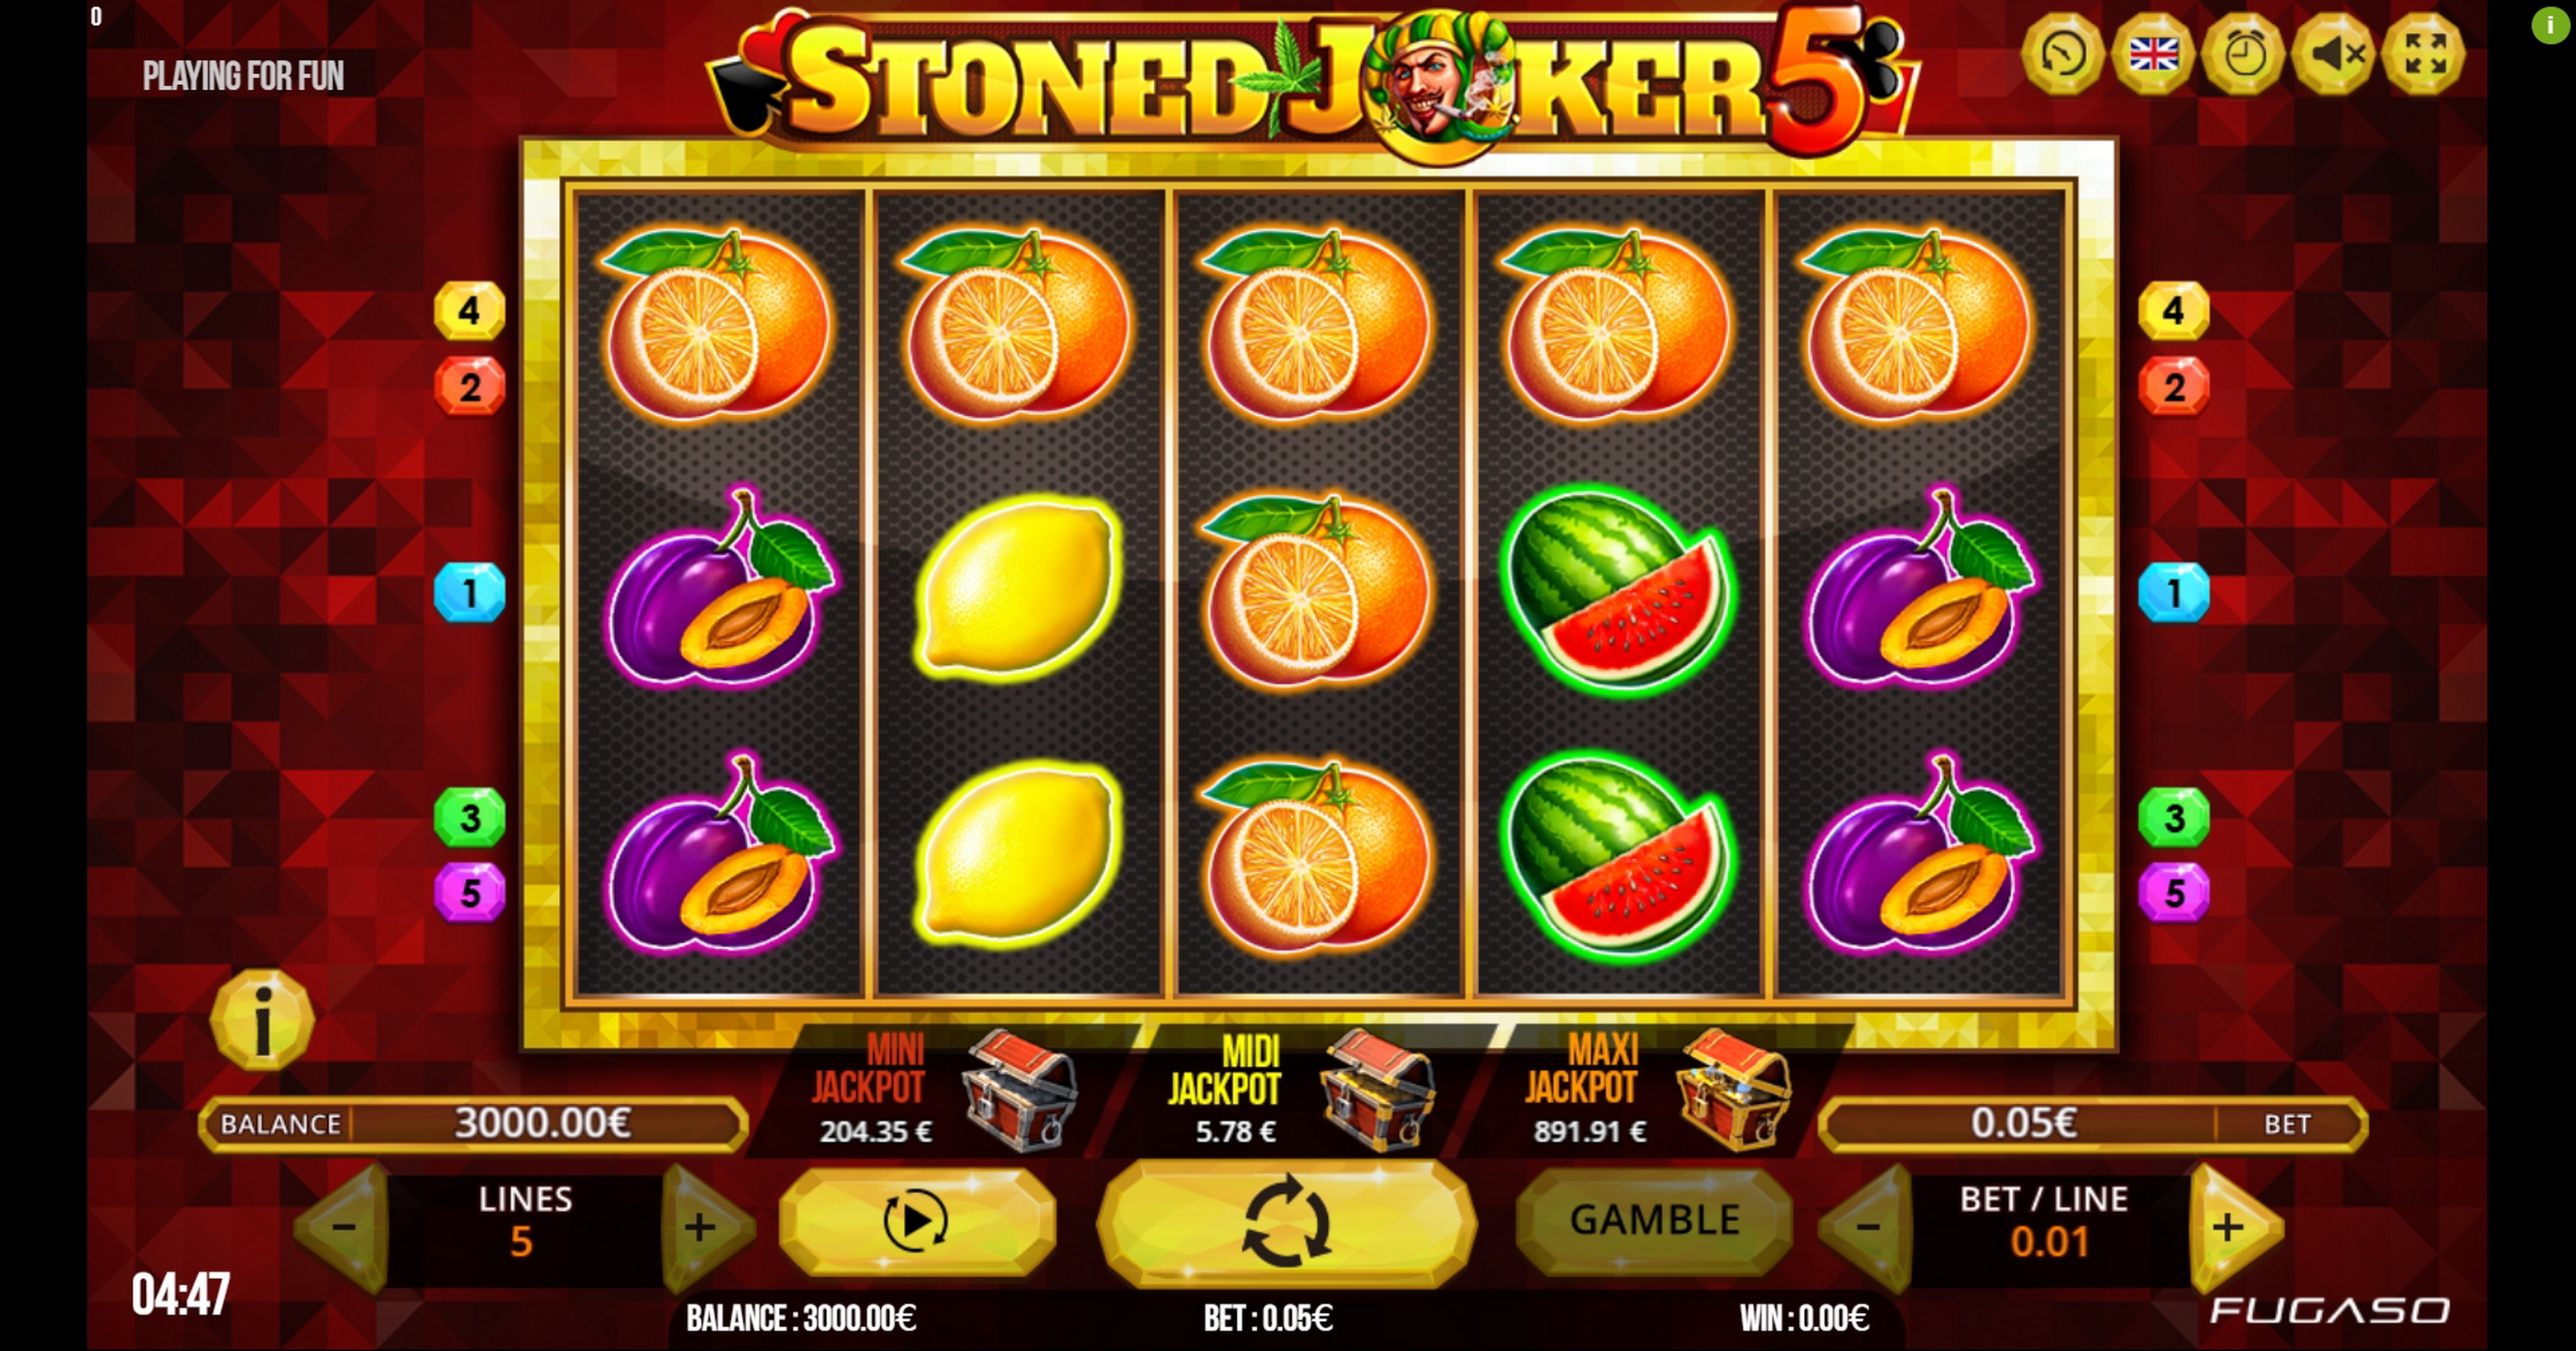 Stoned Joker 5 free demo play Slot Machine Online by Fugaso Review ...